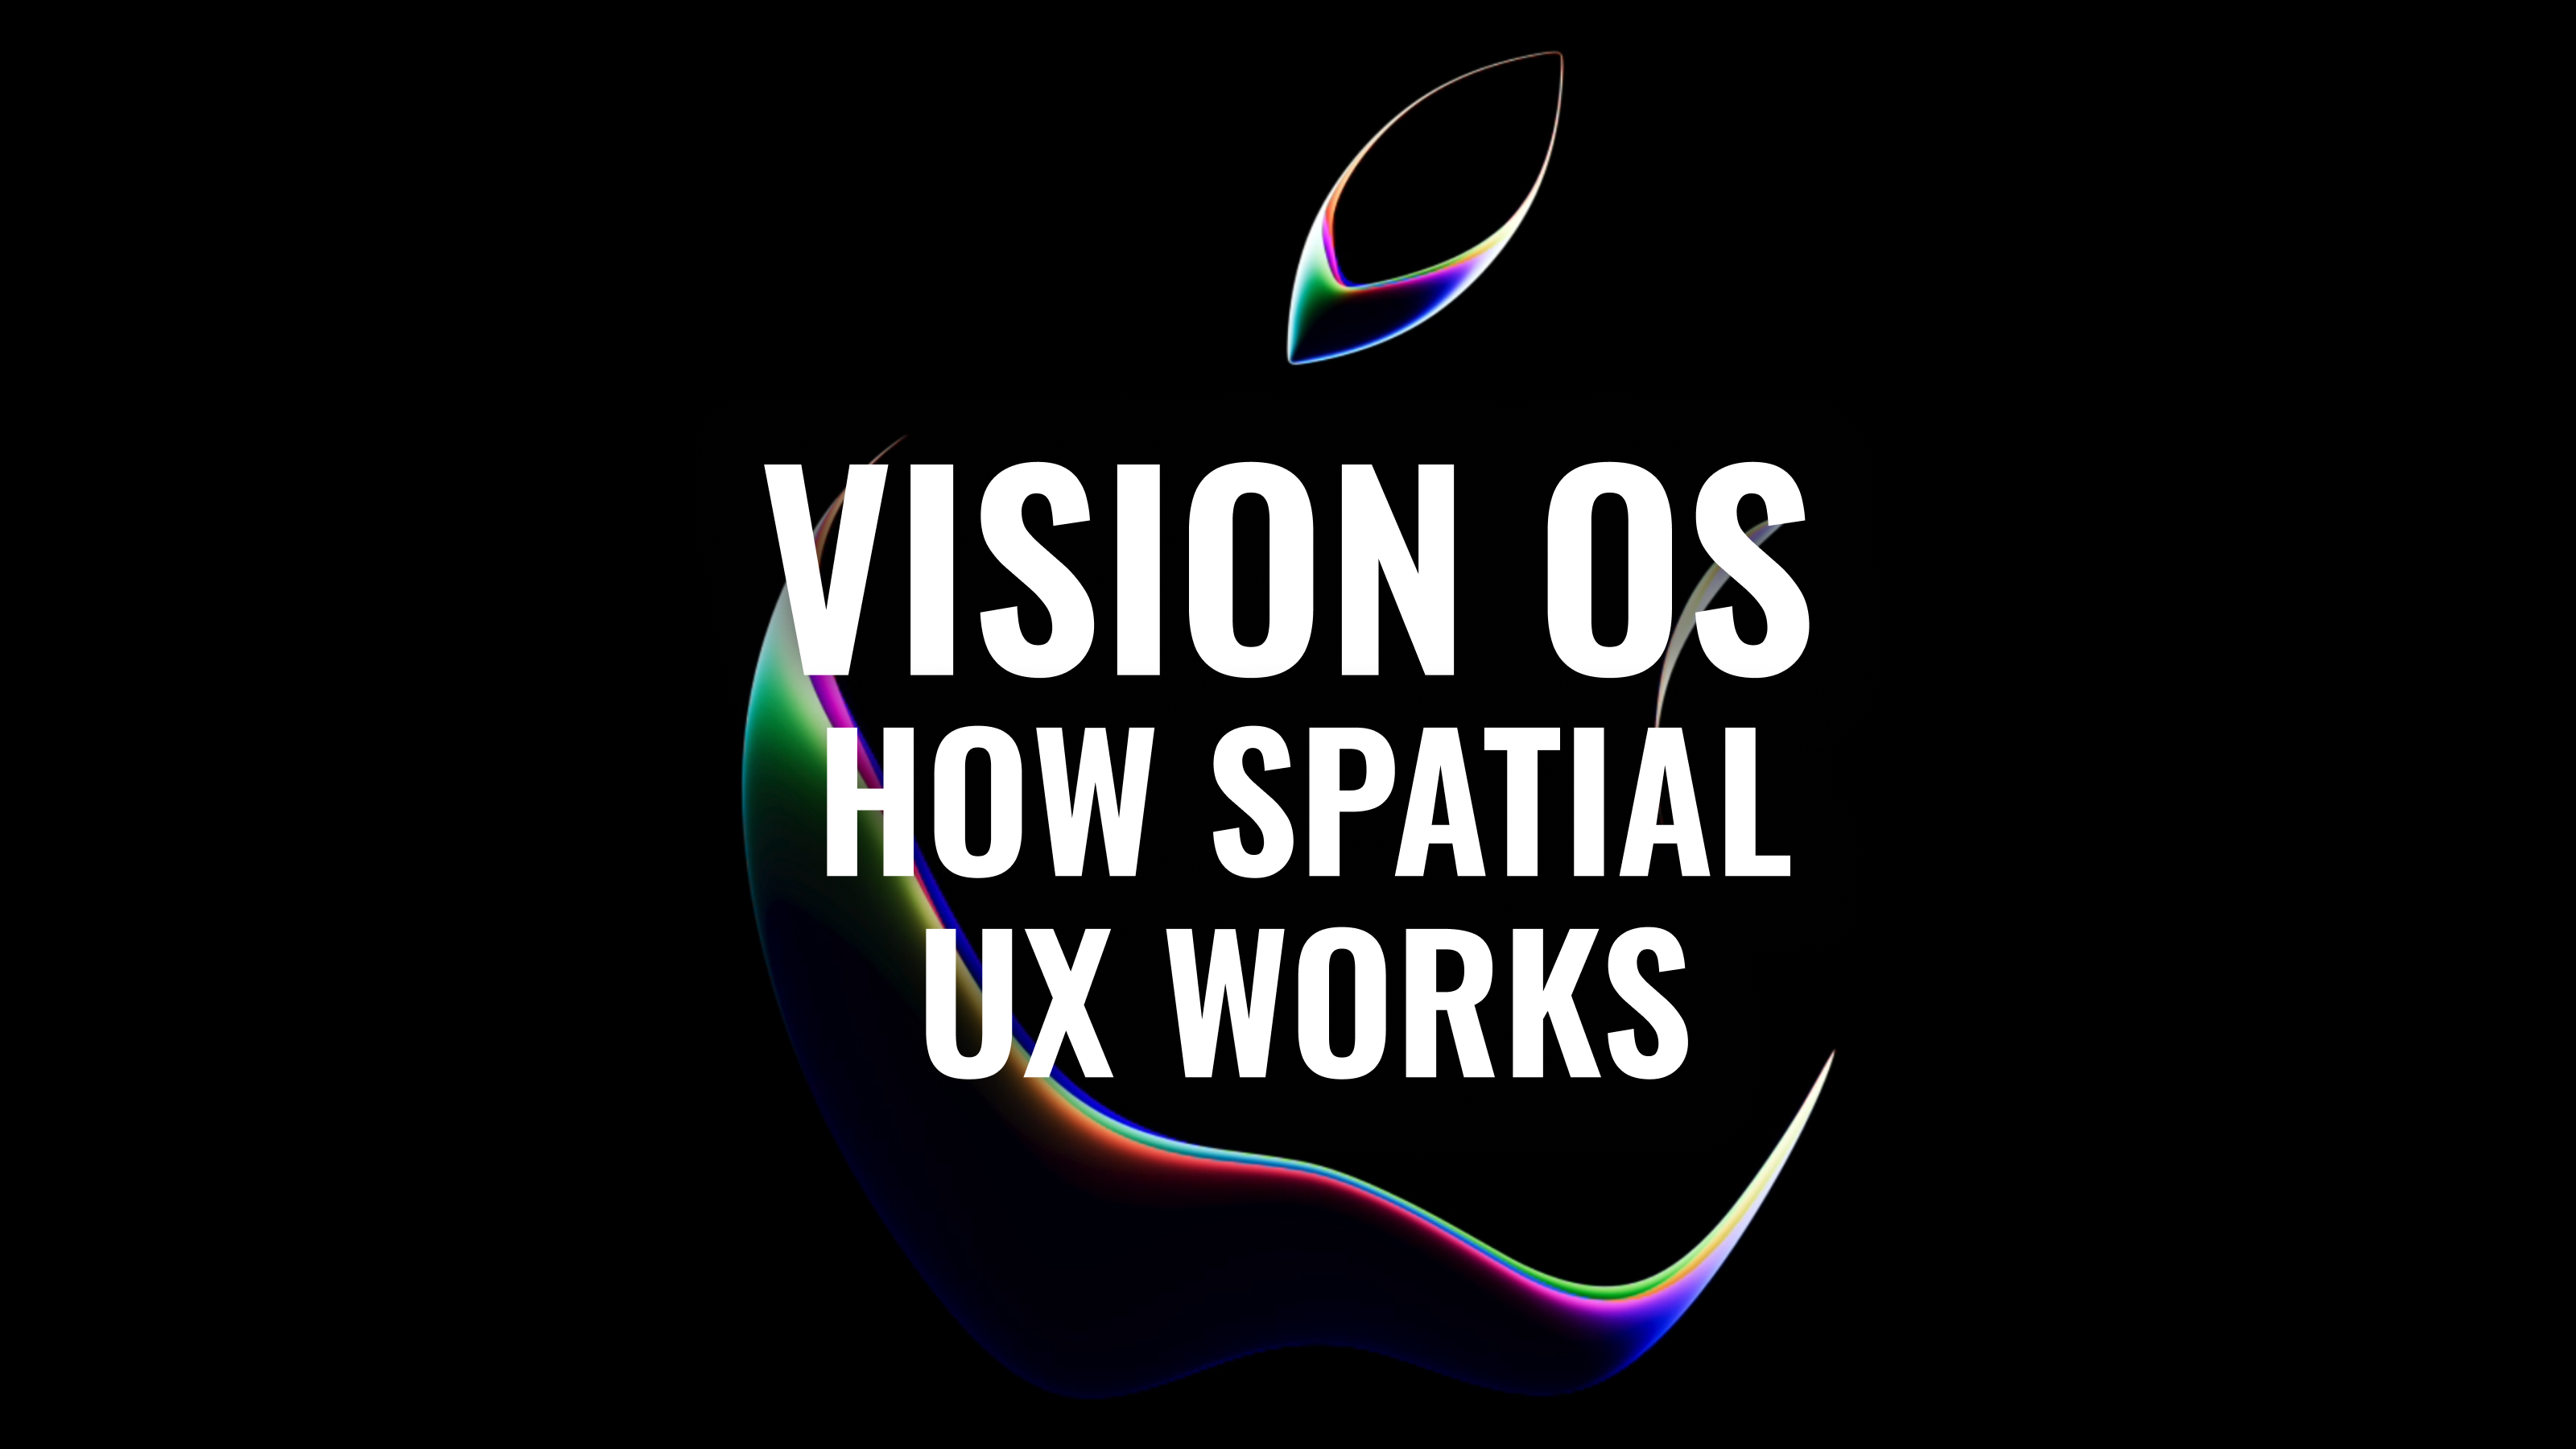 Spatial UX 101:  Getting Started with Vision OS